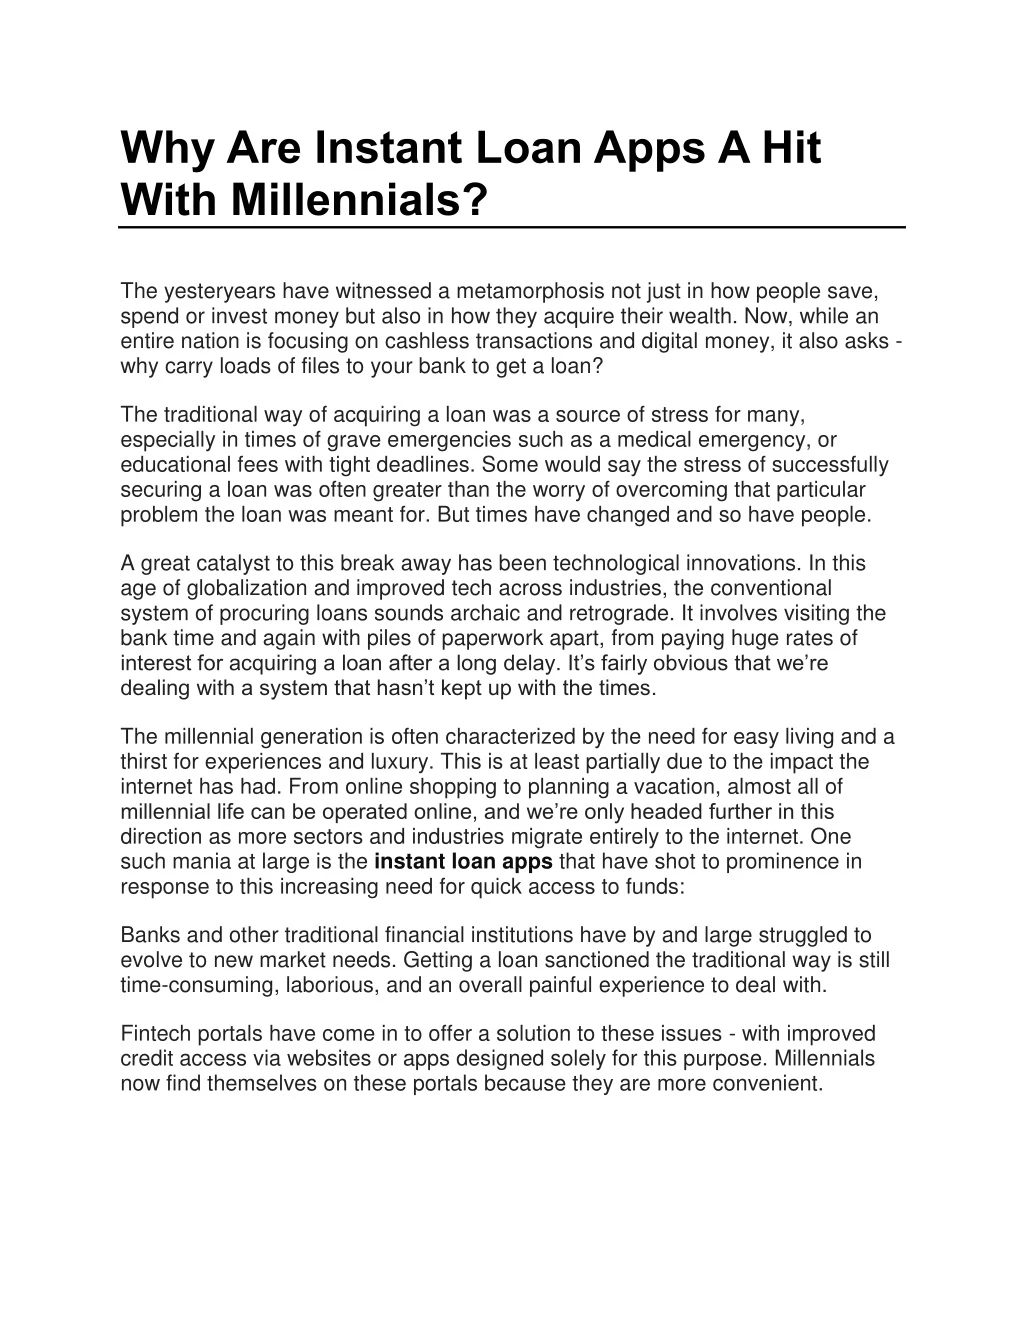 why are instant loan apps a hit with millennials